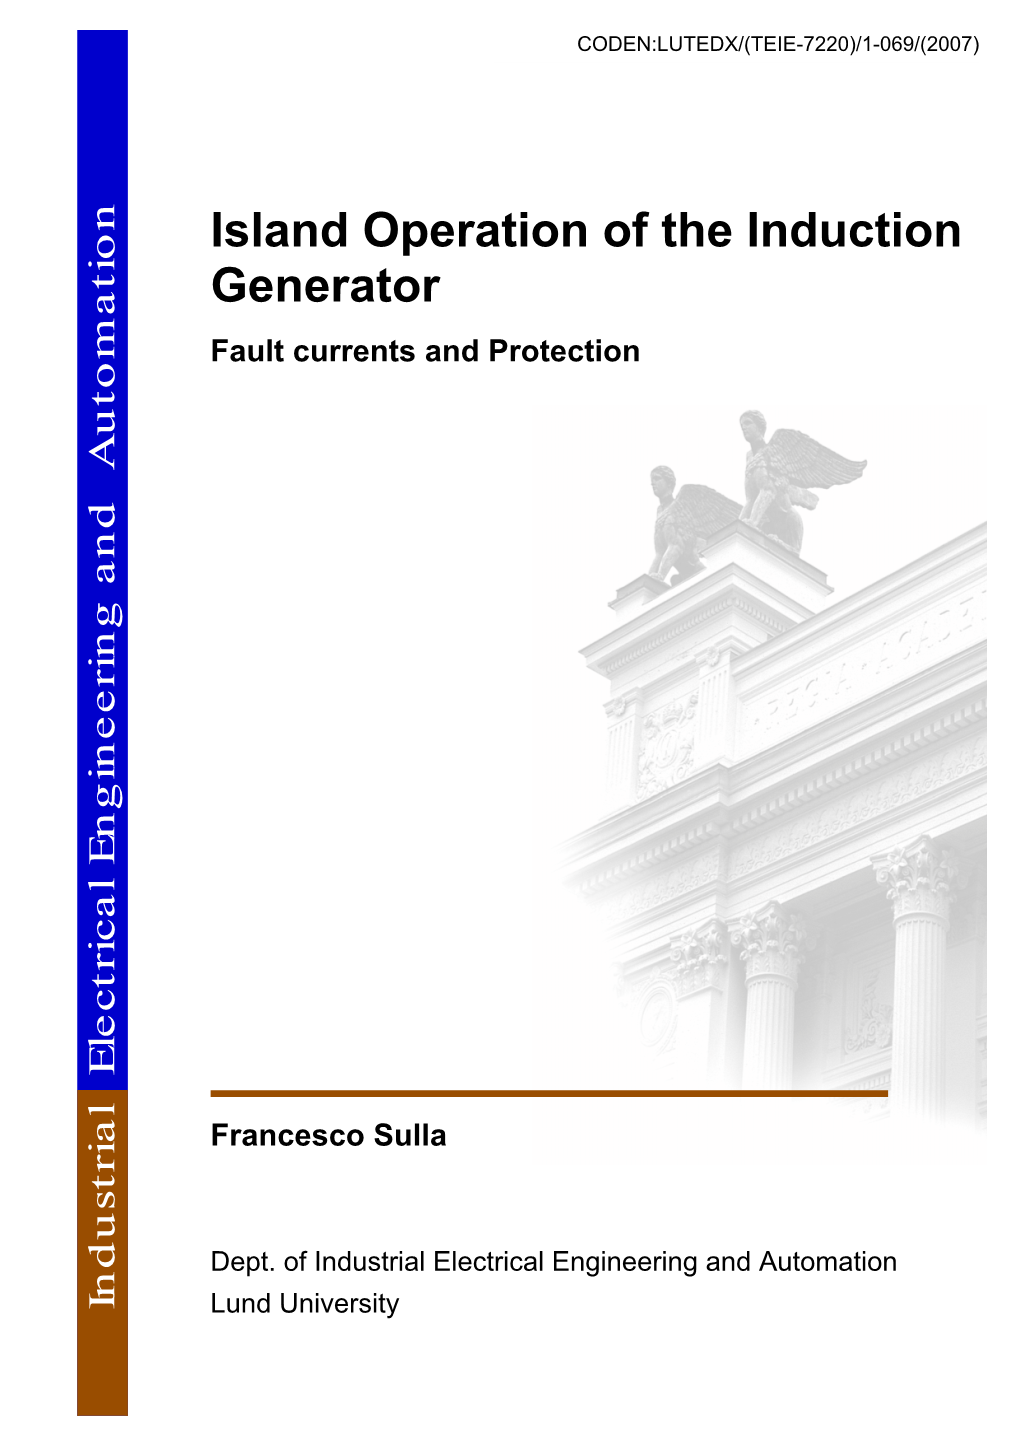 Island Operation of the Induction Generator